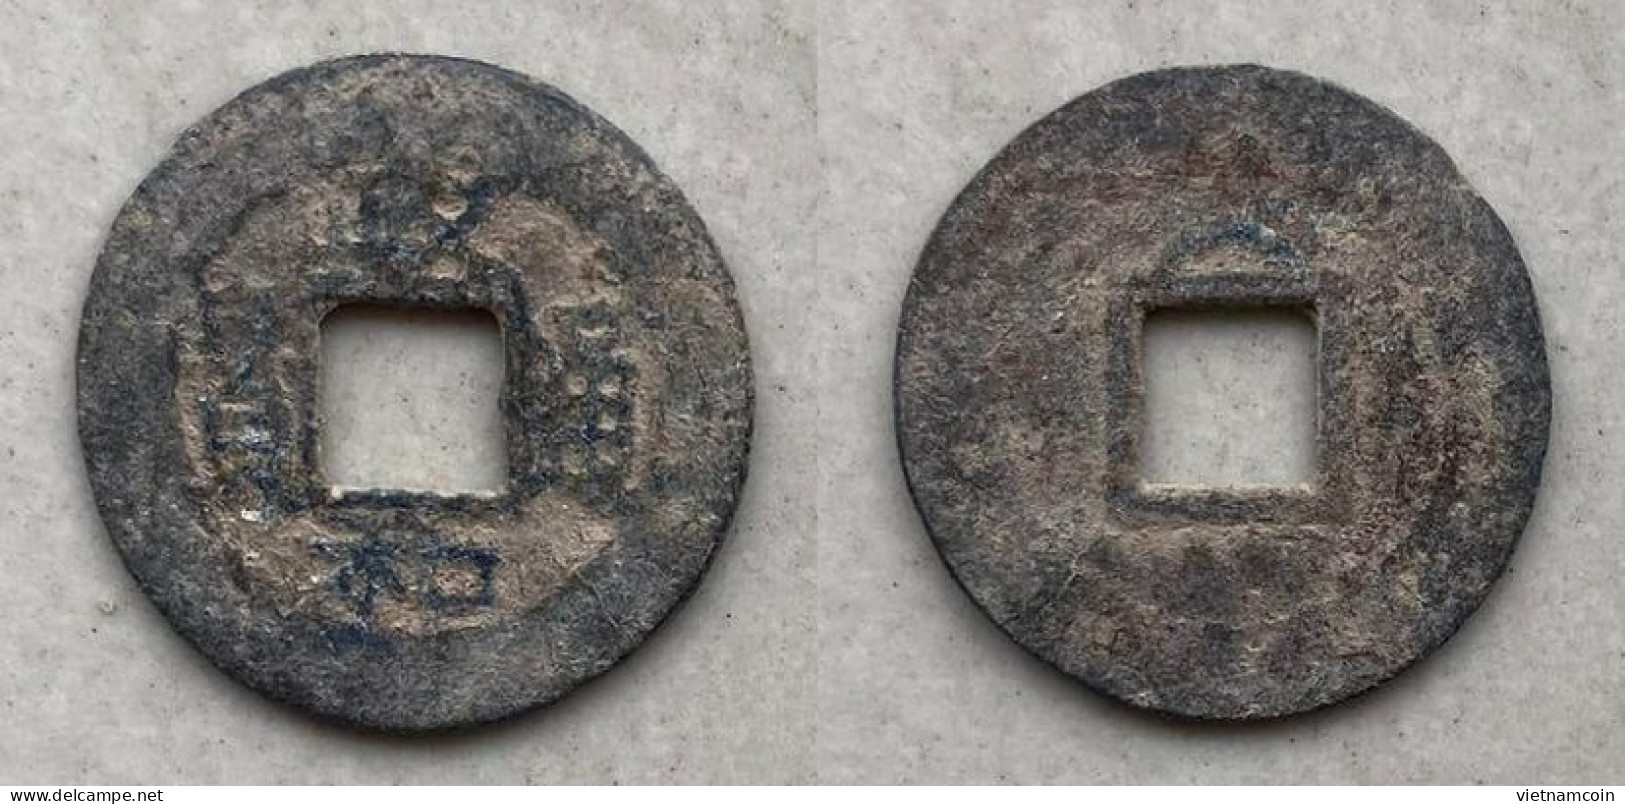 Ancient Annam Coin  Chinh Hoa Thong Bao (zinc Coin) THE NGUYEN LORDS (1558-1778) - Vietnam